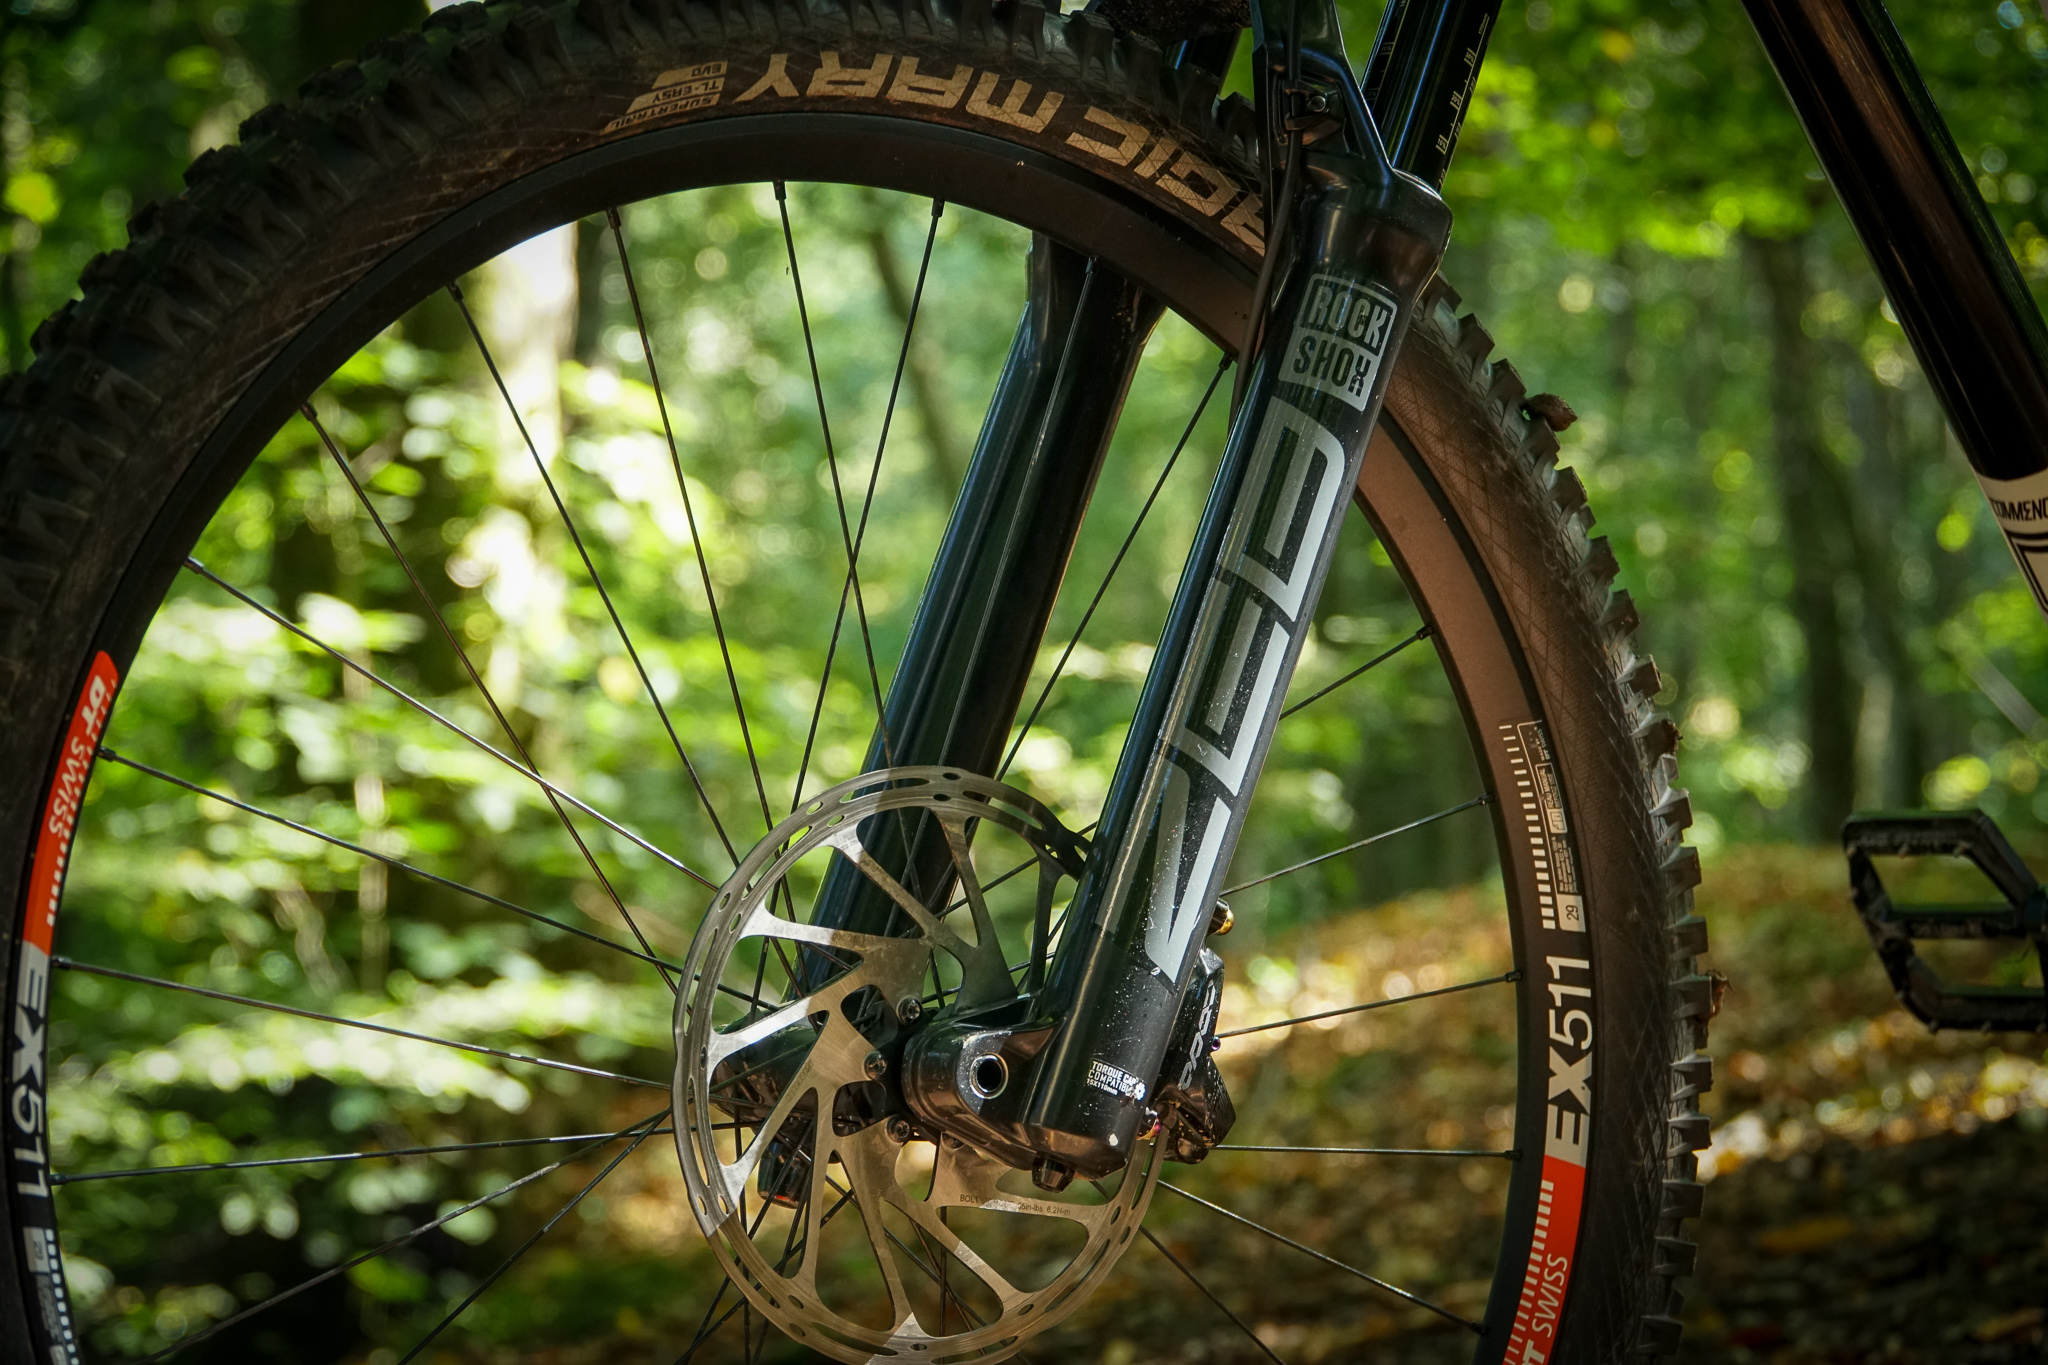 Rockshox Zeb Review: Does 38mm construction offer unrivalled enduro performance?